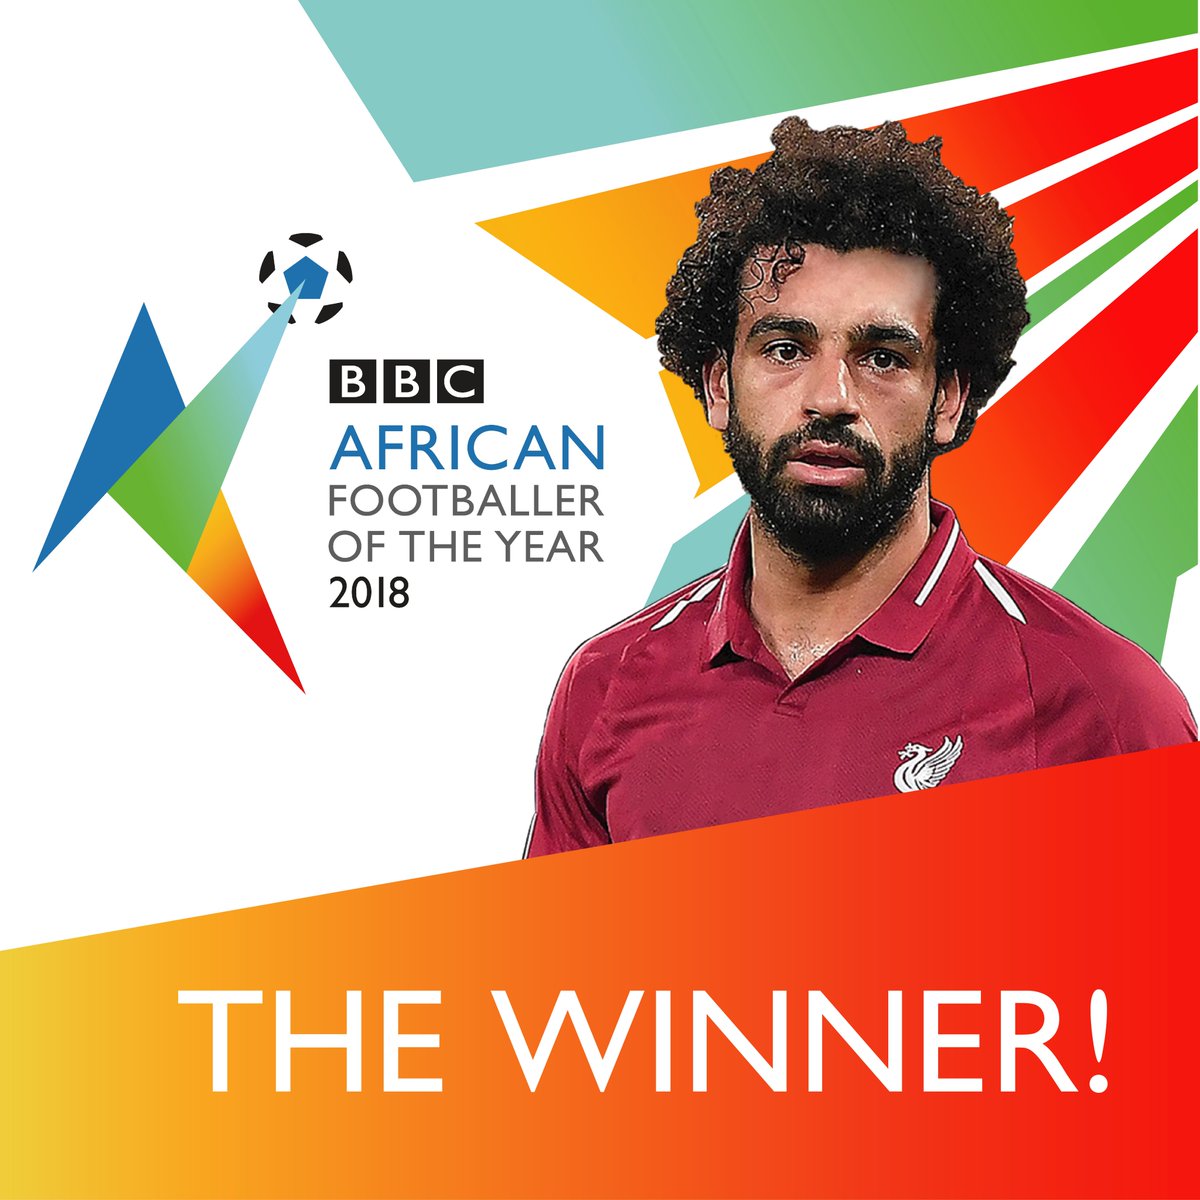 Mohammed Salah wins BBC African Player of the year Award